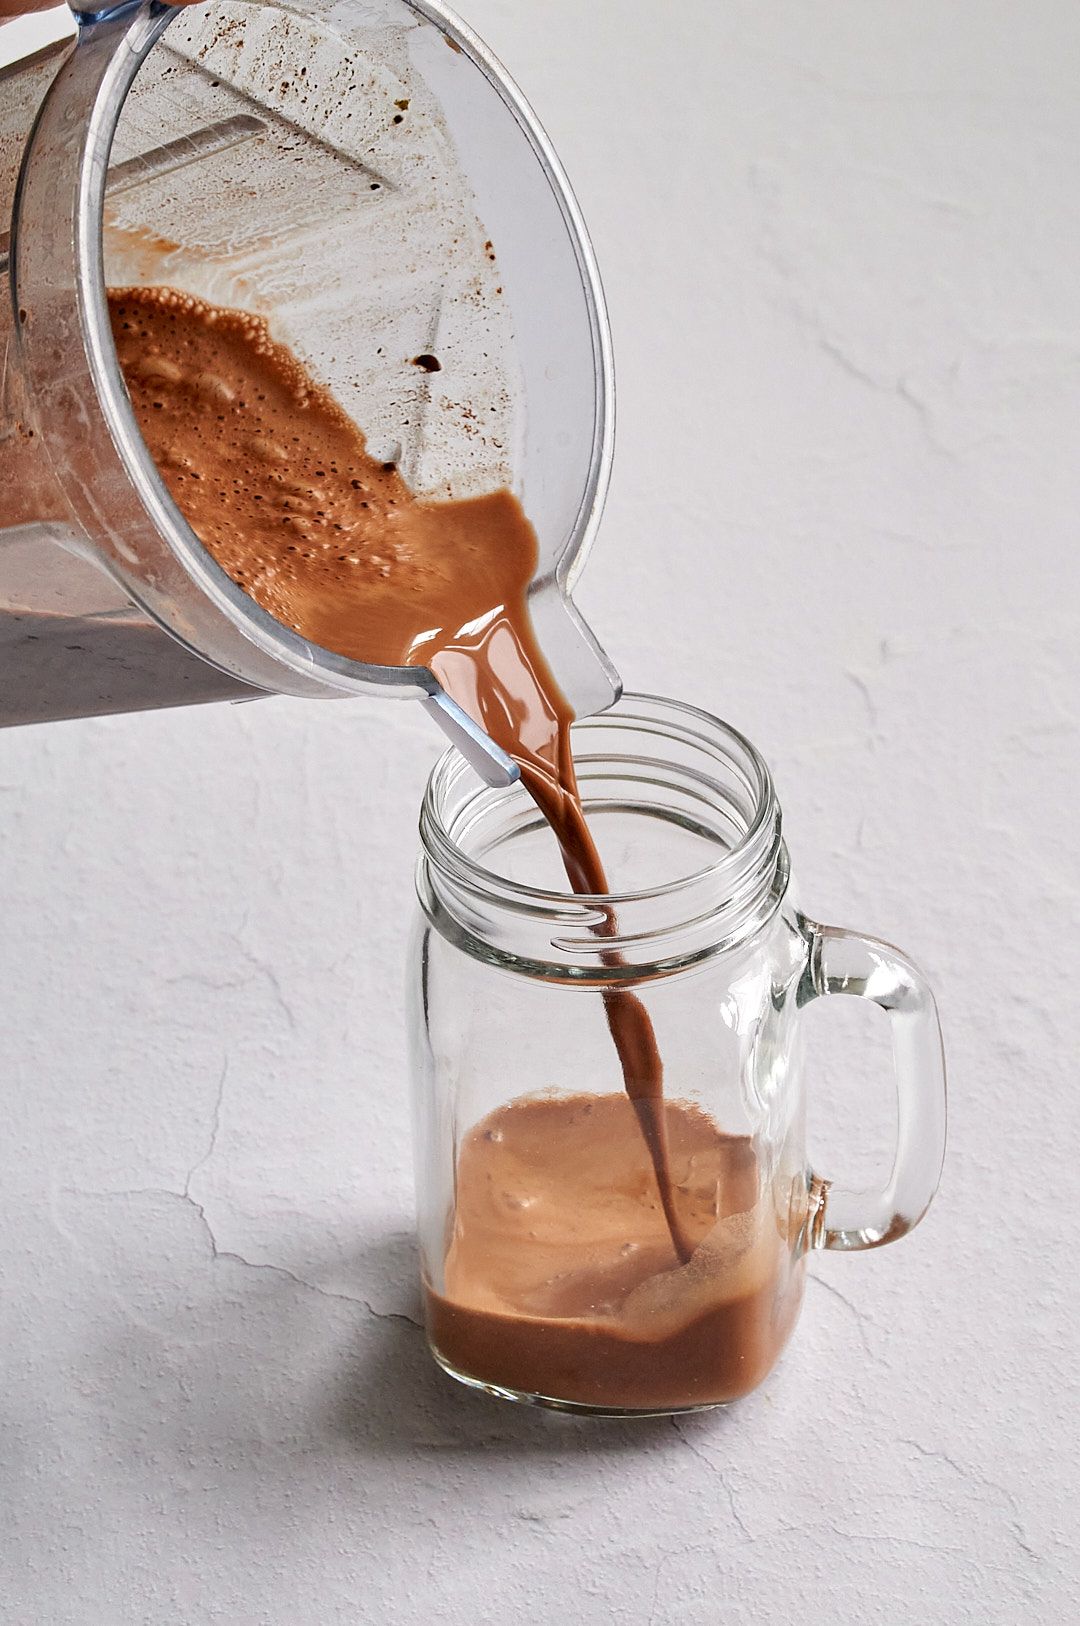 Picture of the hot chocolate being poured from a clear blender into a clear glass mason jar mug.